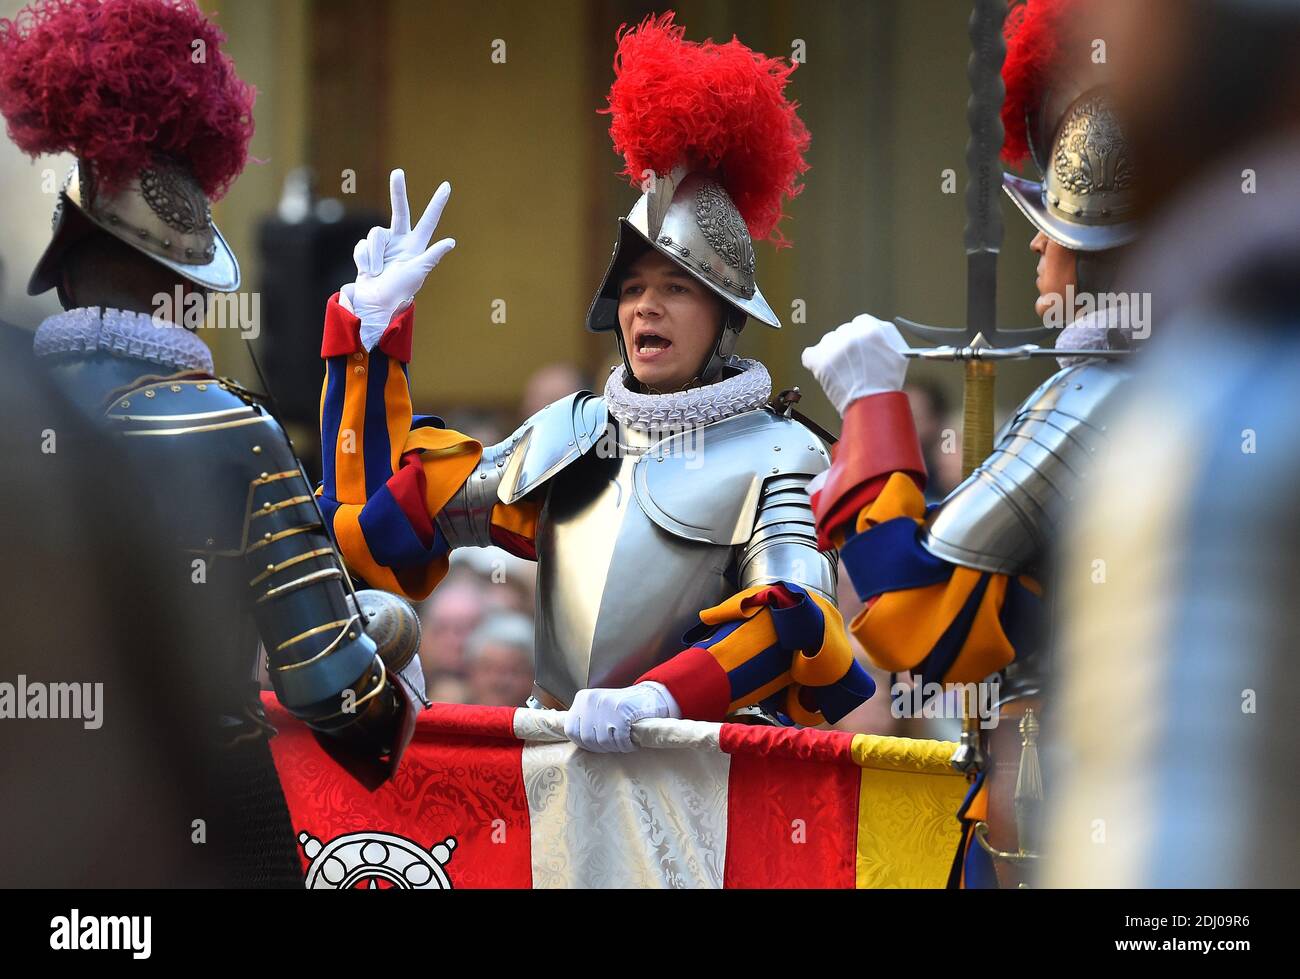 The Vatican's Swiss Guards swore in 23 new recruits on May 6, 2016 at the Vatican. The new recruits joined their ranks in an elaborate swearing-in ceremony . The ceremony is held each May 6 to commemorate the 147 Swiss Guards who died protecting Pope Clement VII during the 1527 Sack of Rome. Then each new recruit grasped the corps' flag and, raising three fingers in a symbol of the Holy Trinity, swore to uphold the Swiss Guard oath to protect pope Francis and his successors. The Swiss Guard, founded in 1506, consists of 100 volunteers who must be Swiss nationals, Catholic, single, at least 174 Stock Photo